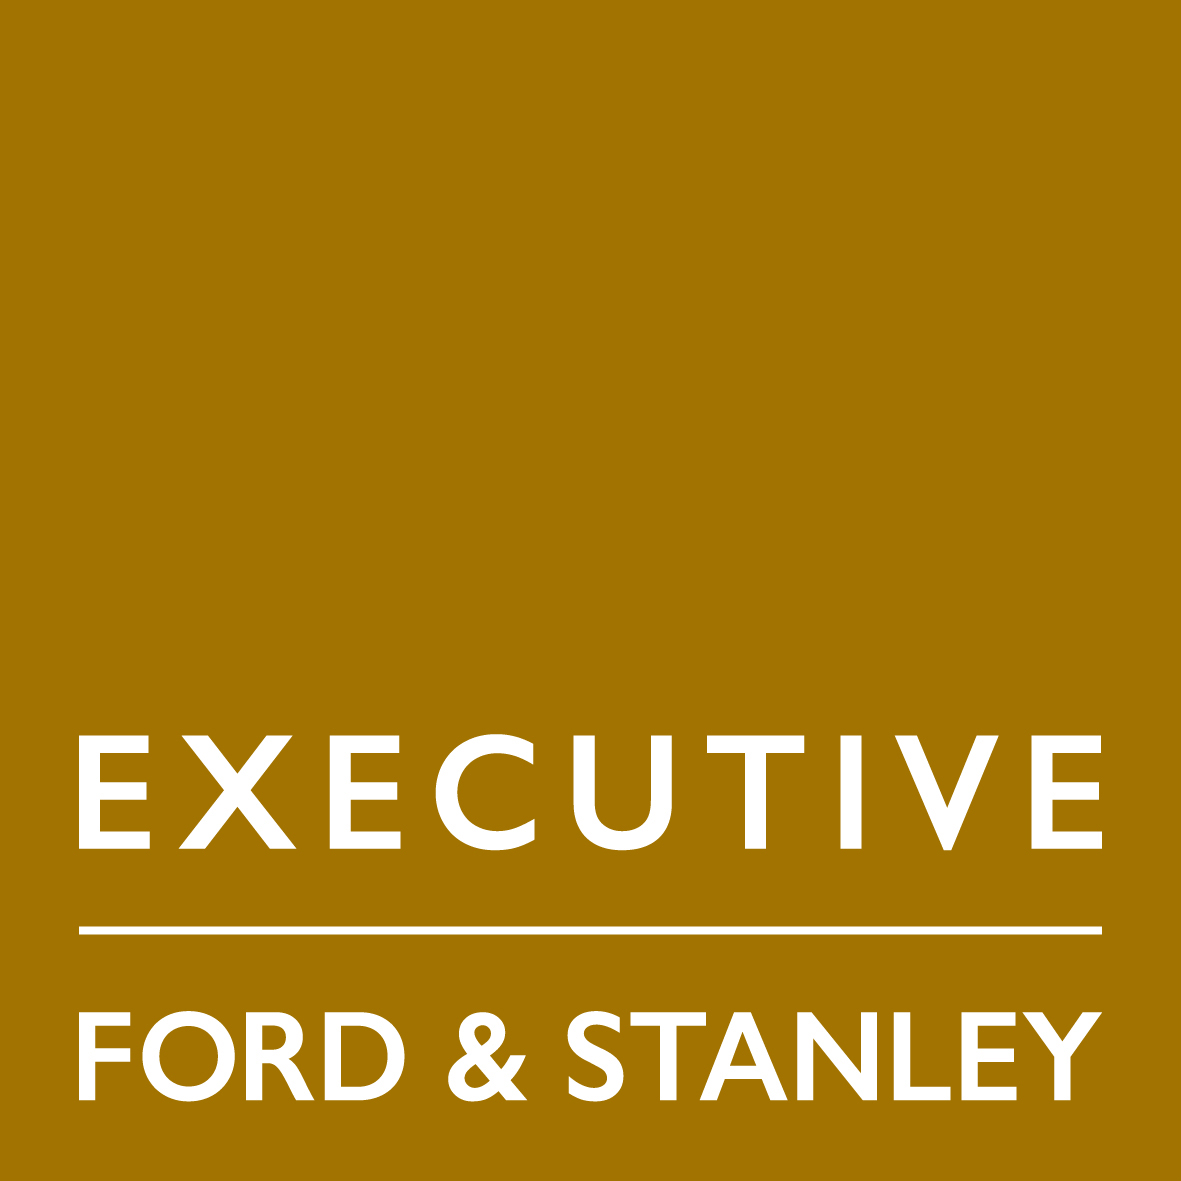 Executive Ford & Stanley logo